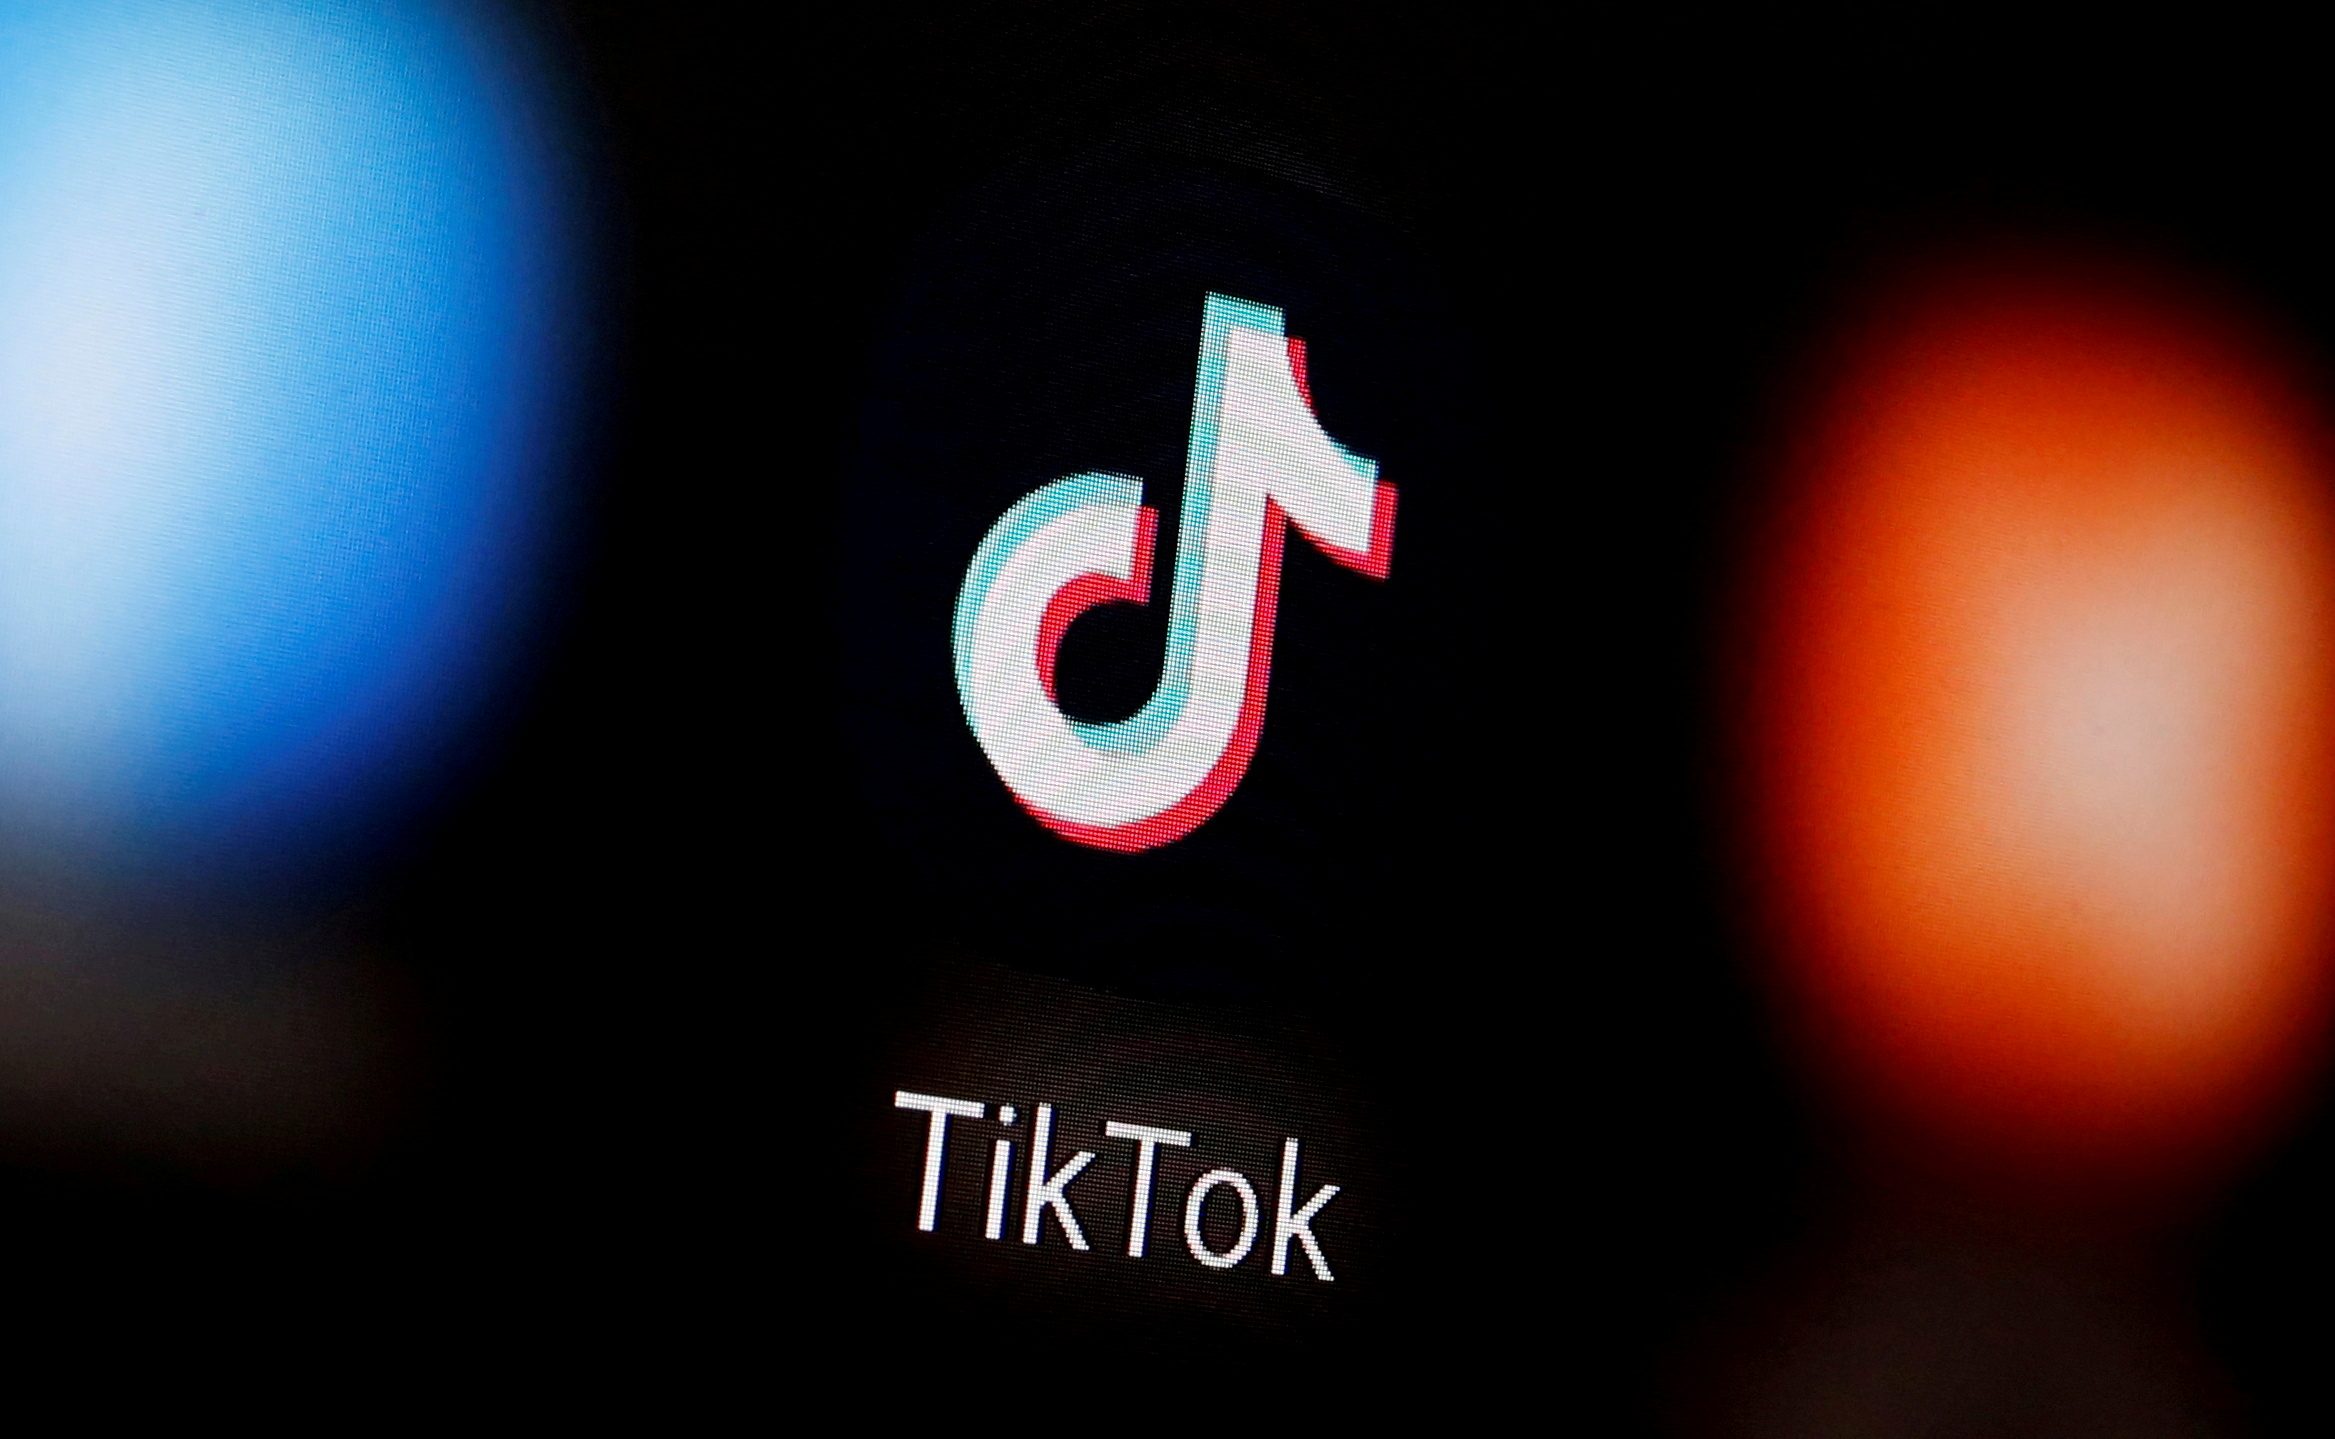 Girl rescued in US after using TikTok domestic violence hand signal